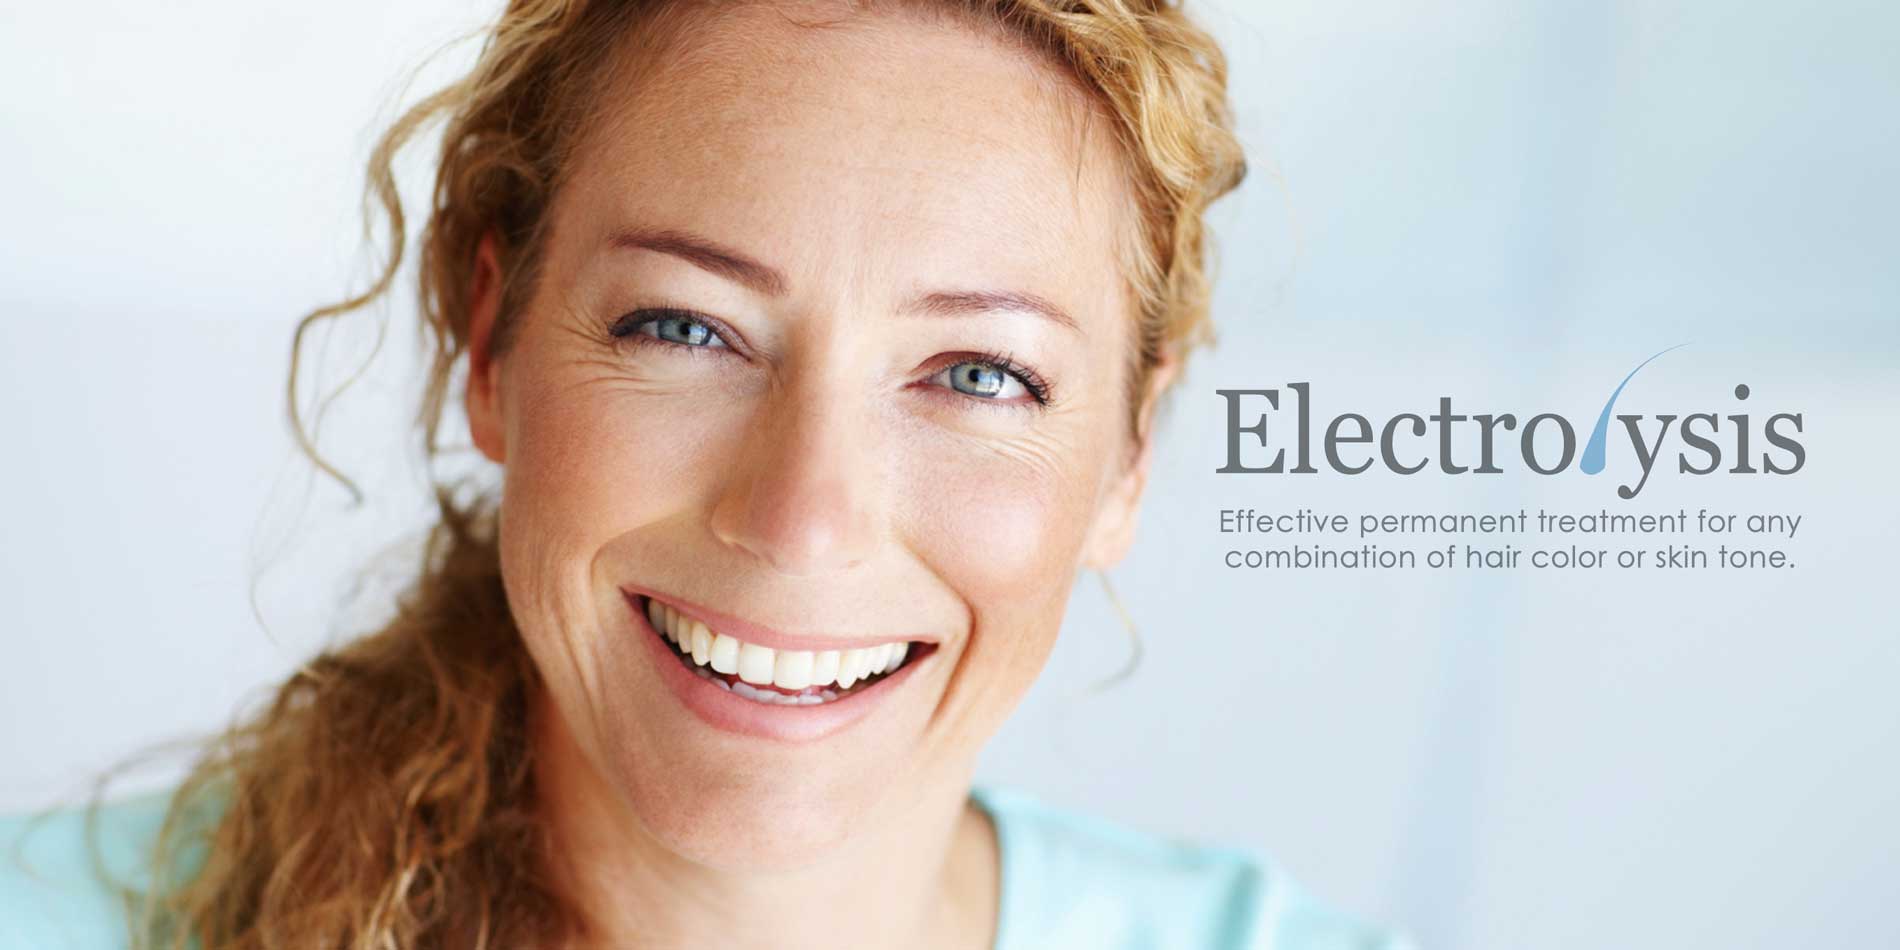 Electrolysis Permanent Hair Removal | Laser Hair Removal